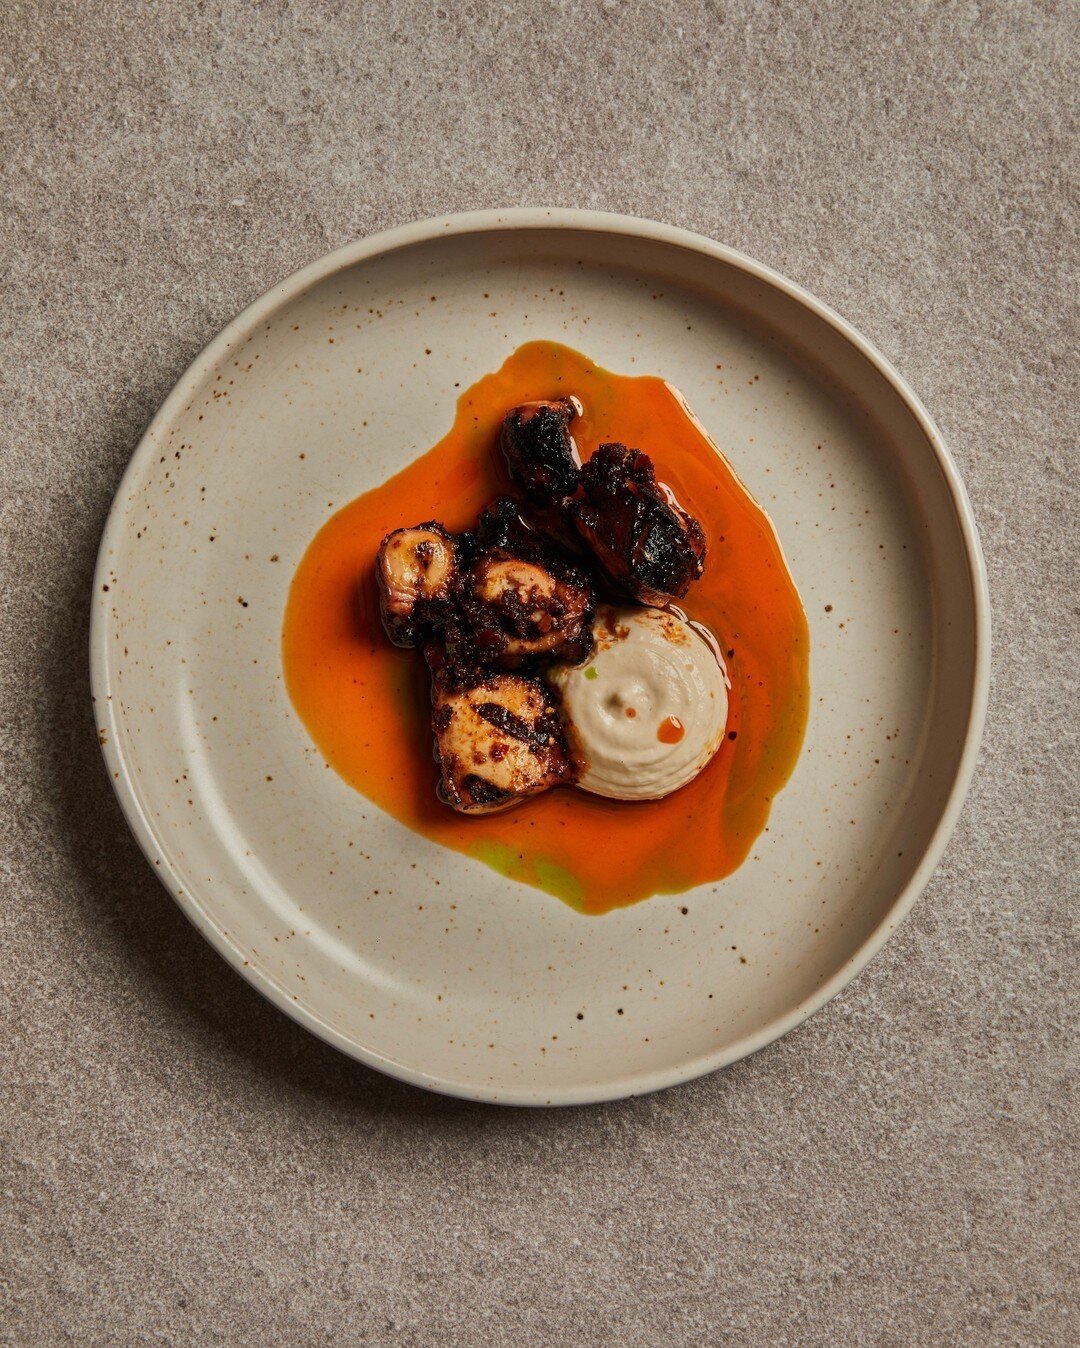 Occy, Occy, Occy. Oi Oi Oi​​​​​​​​
​​​​​​​​
Our grilled octopus with potato aioli and Nashville sauce is a little bit spicy, a little bit sweet and superbly lip-numbing ​​​​​​​​
​​​​​​​​
A cracking entree to start your engines 🐙 🔥​​​​​​​​
​​​​​​​​
